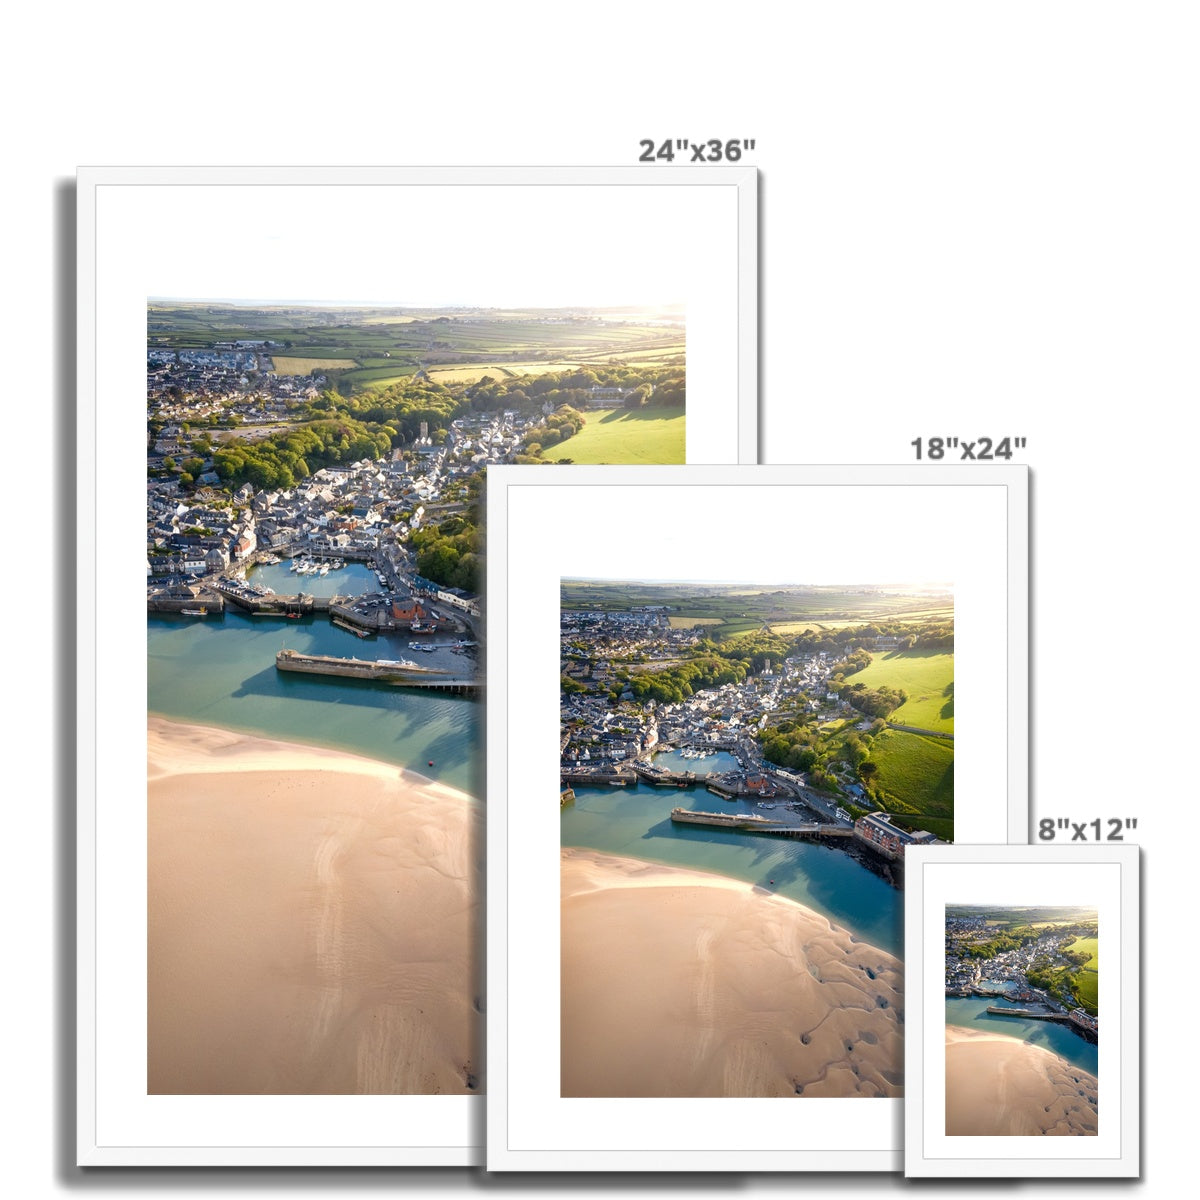 padstow wooden frame sizes